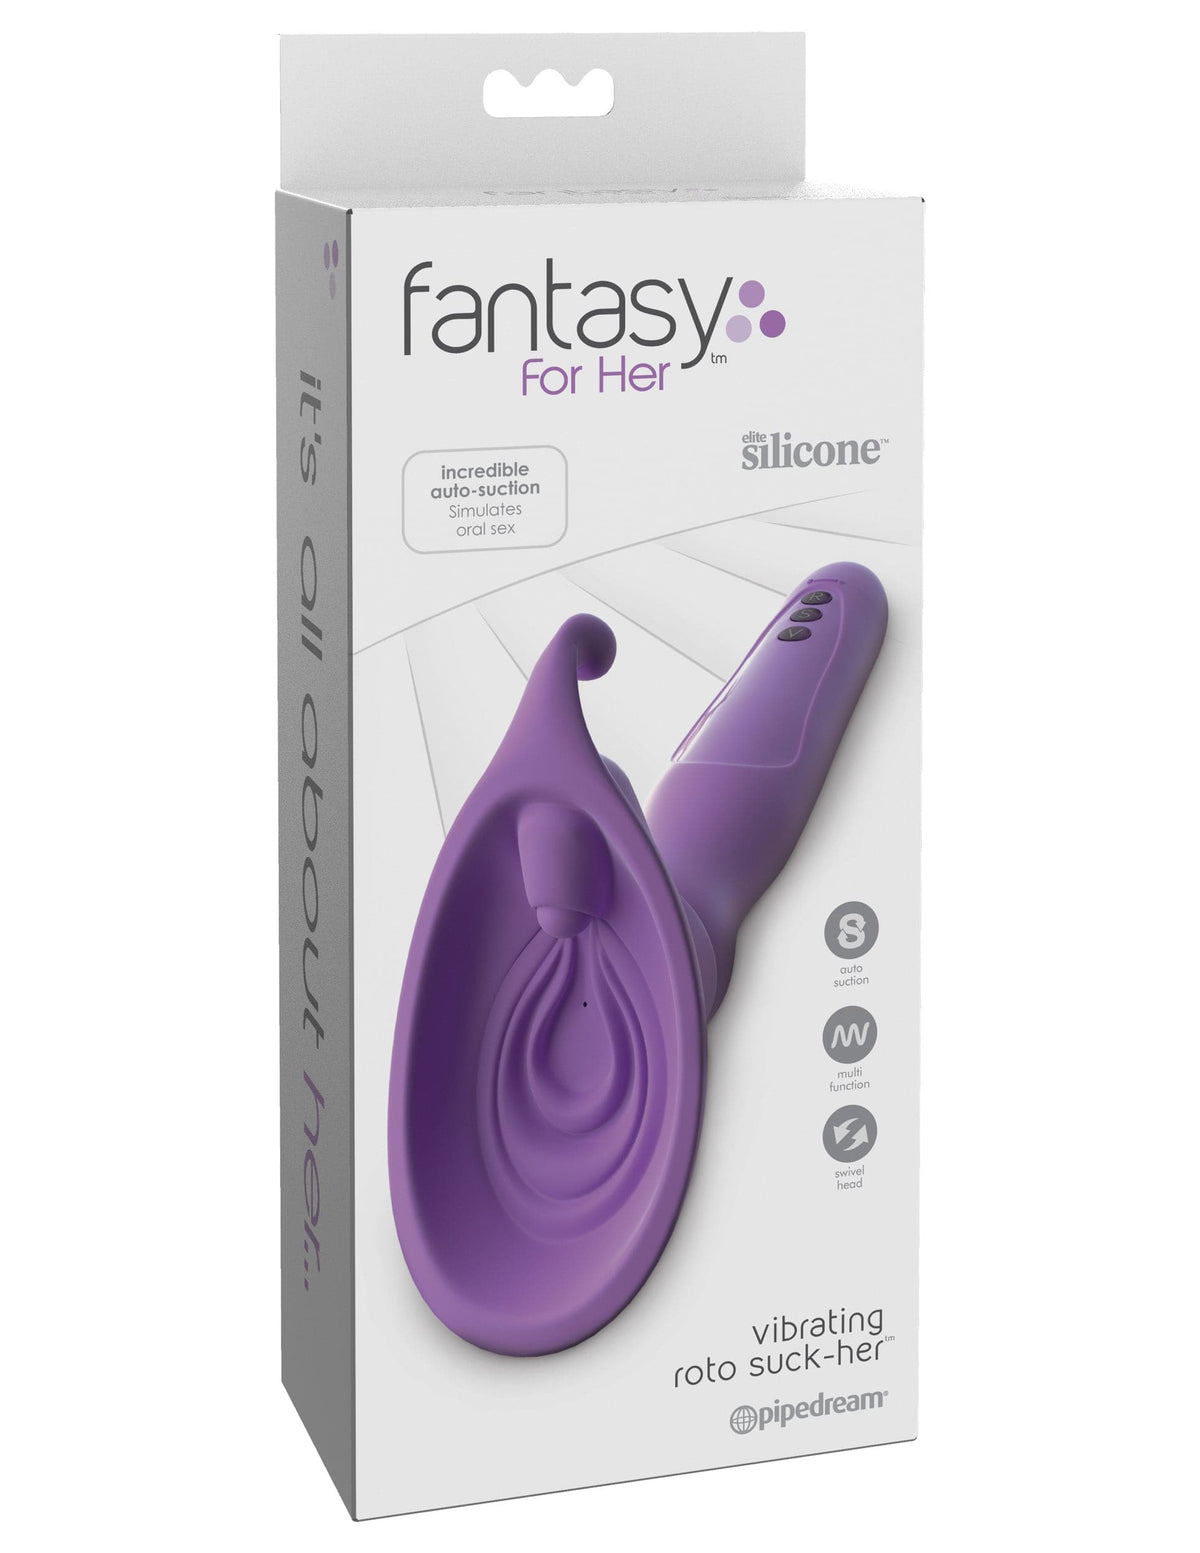 fantasy for her vibrating roto suck her